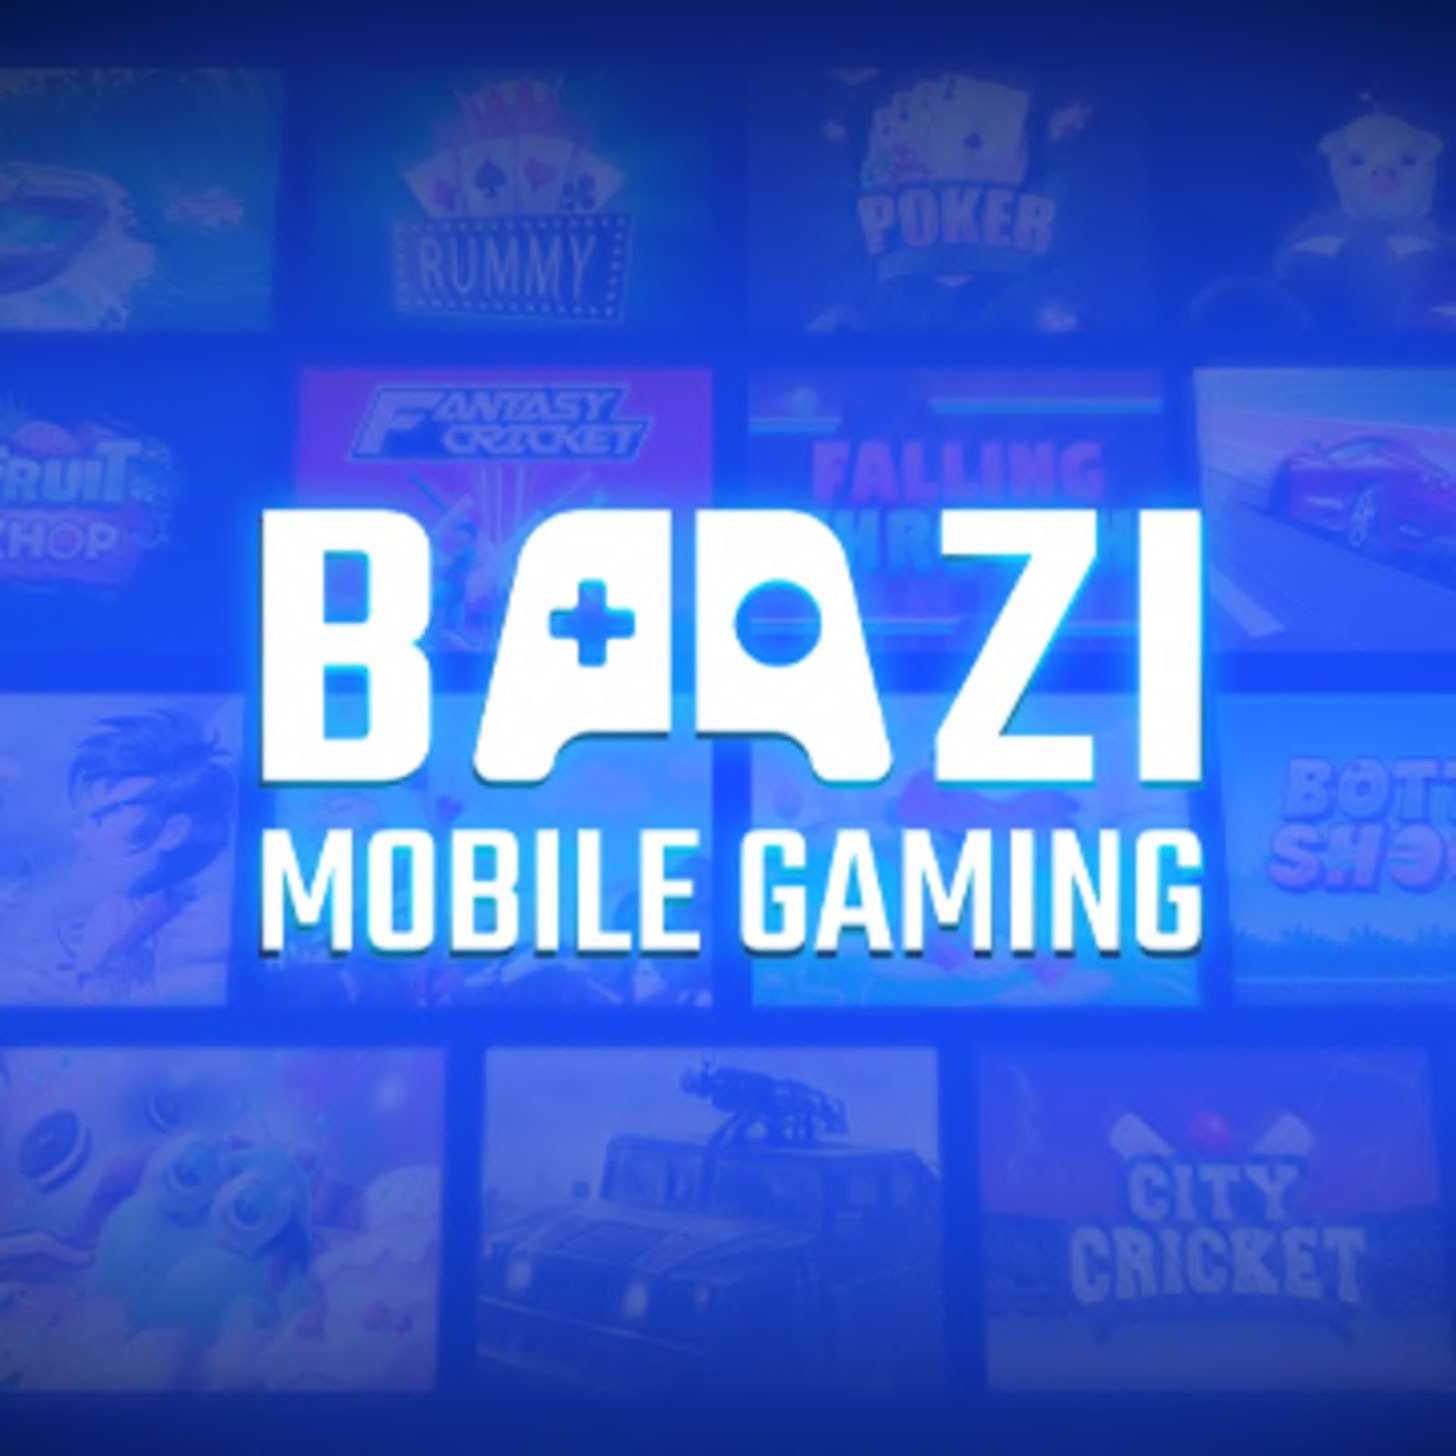 Baazi Games Makes a Splash in Hyper-Casual Gaming With Baazi Mobile Gaming